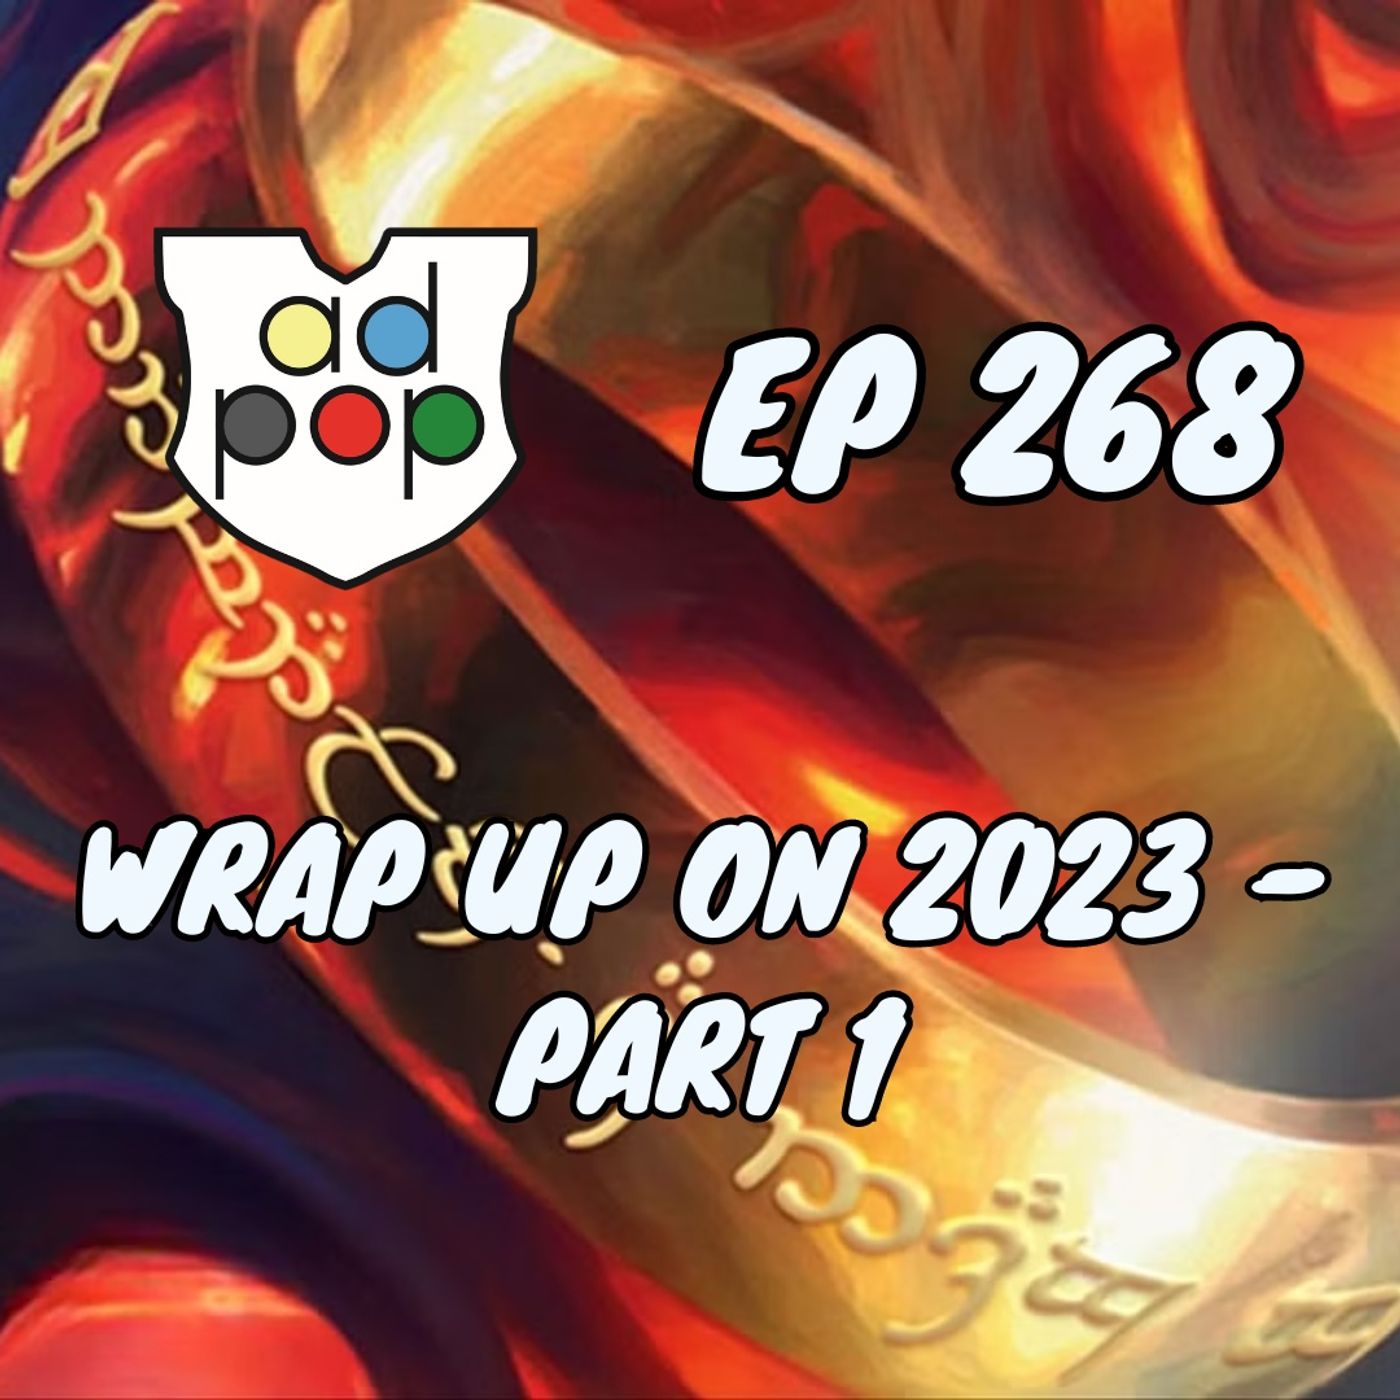 Commander ad Populum, Ep 268 - We Wrap Up On 2023 - Part 1